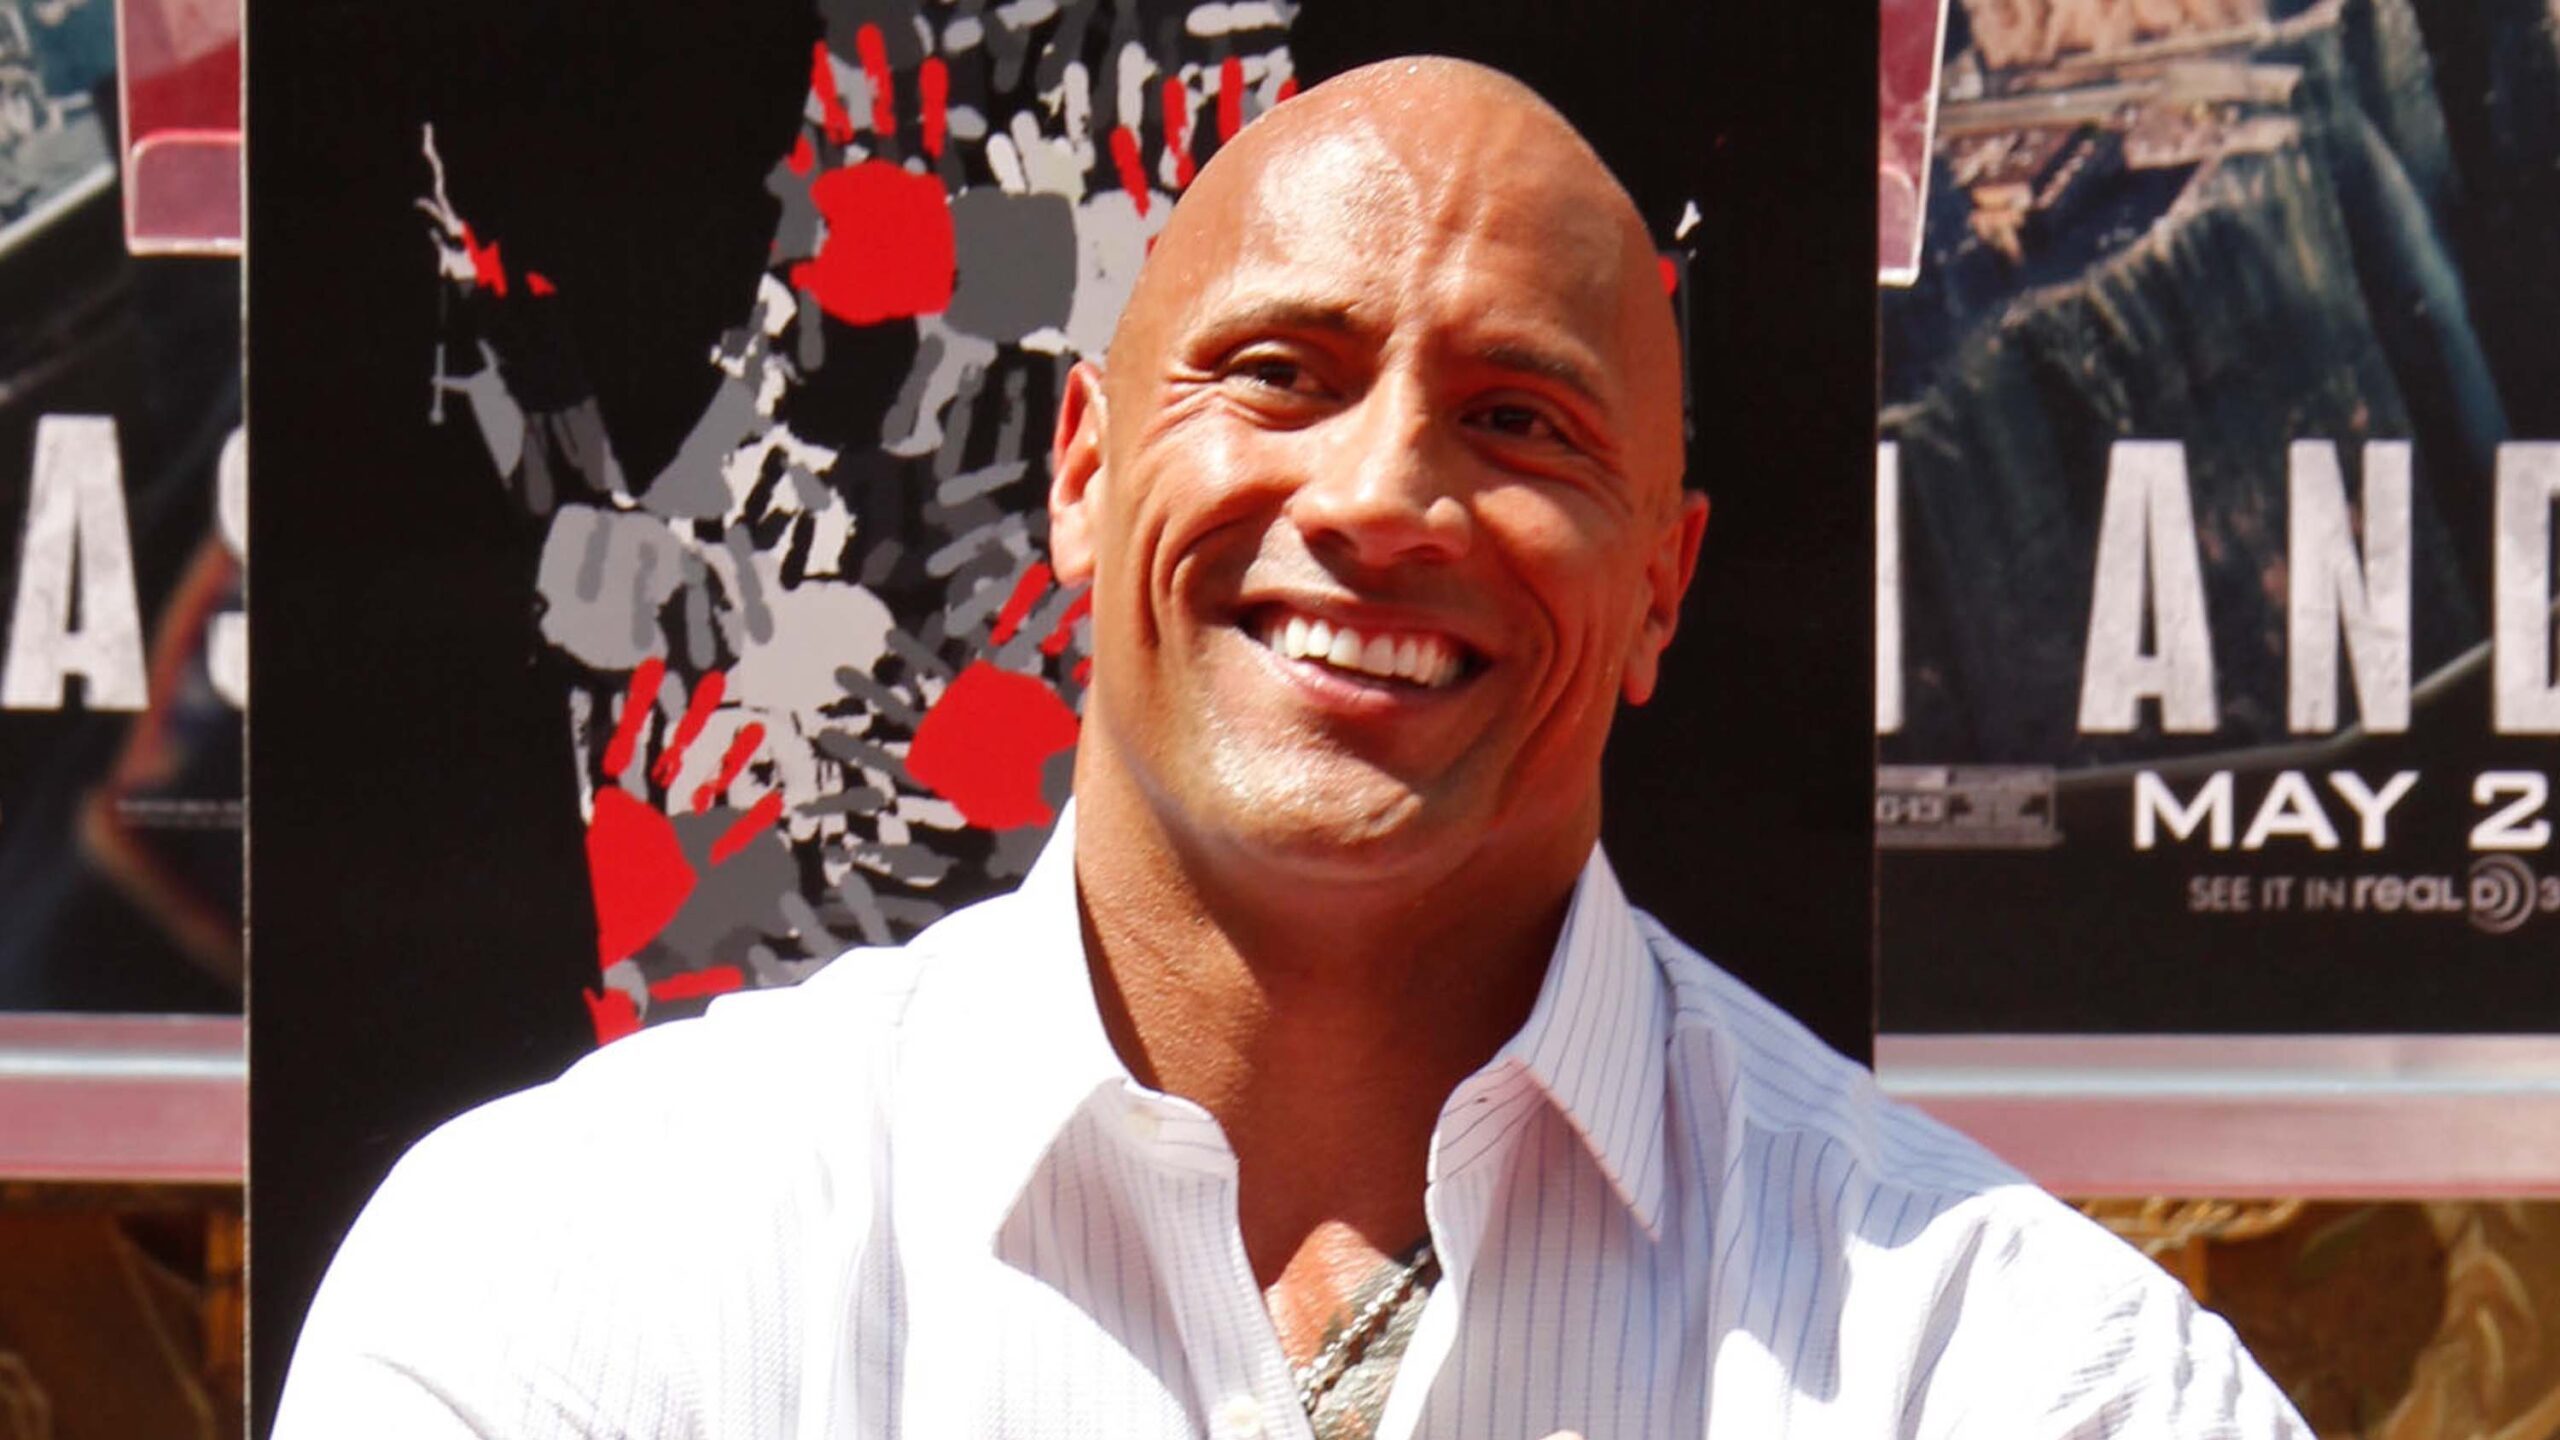 Dwayne Johnson tops ‘Forbes’ list of highest-paid actors 2016